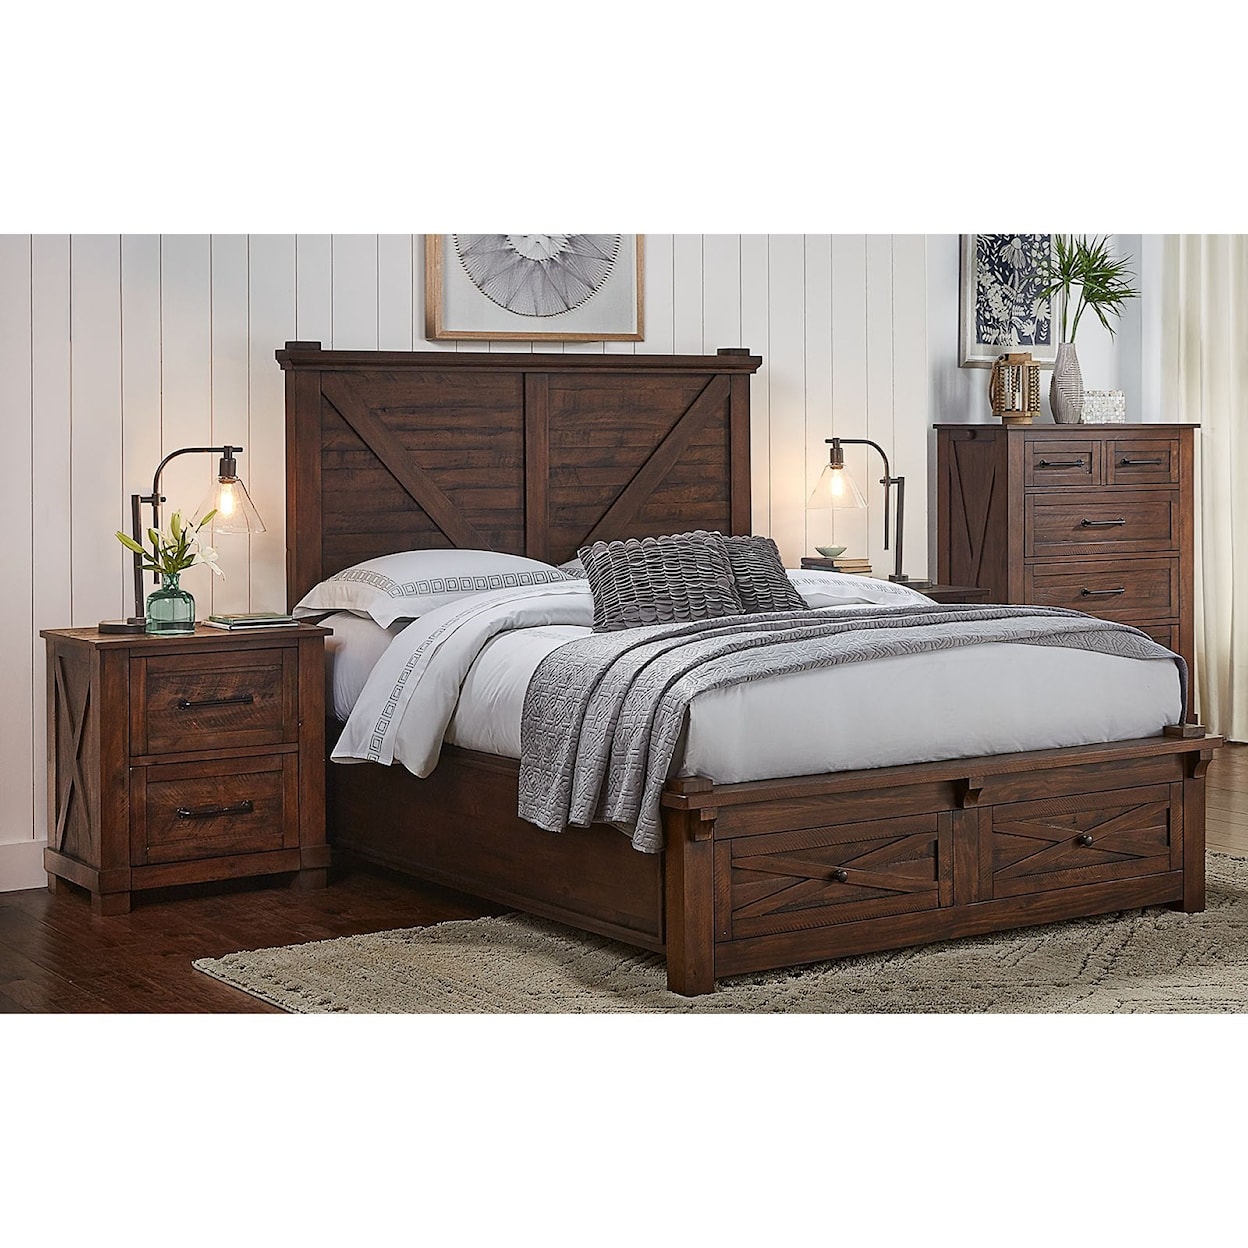 A-A Sun Valley King Bed with Footboard Bench